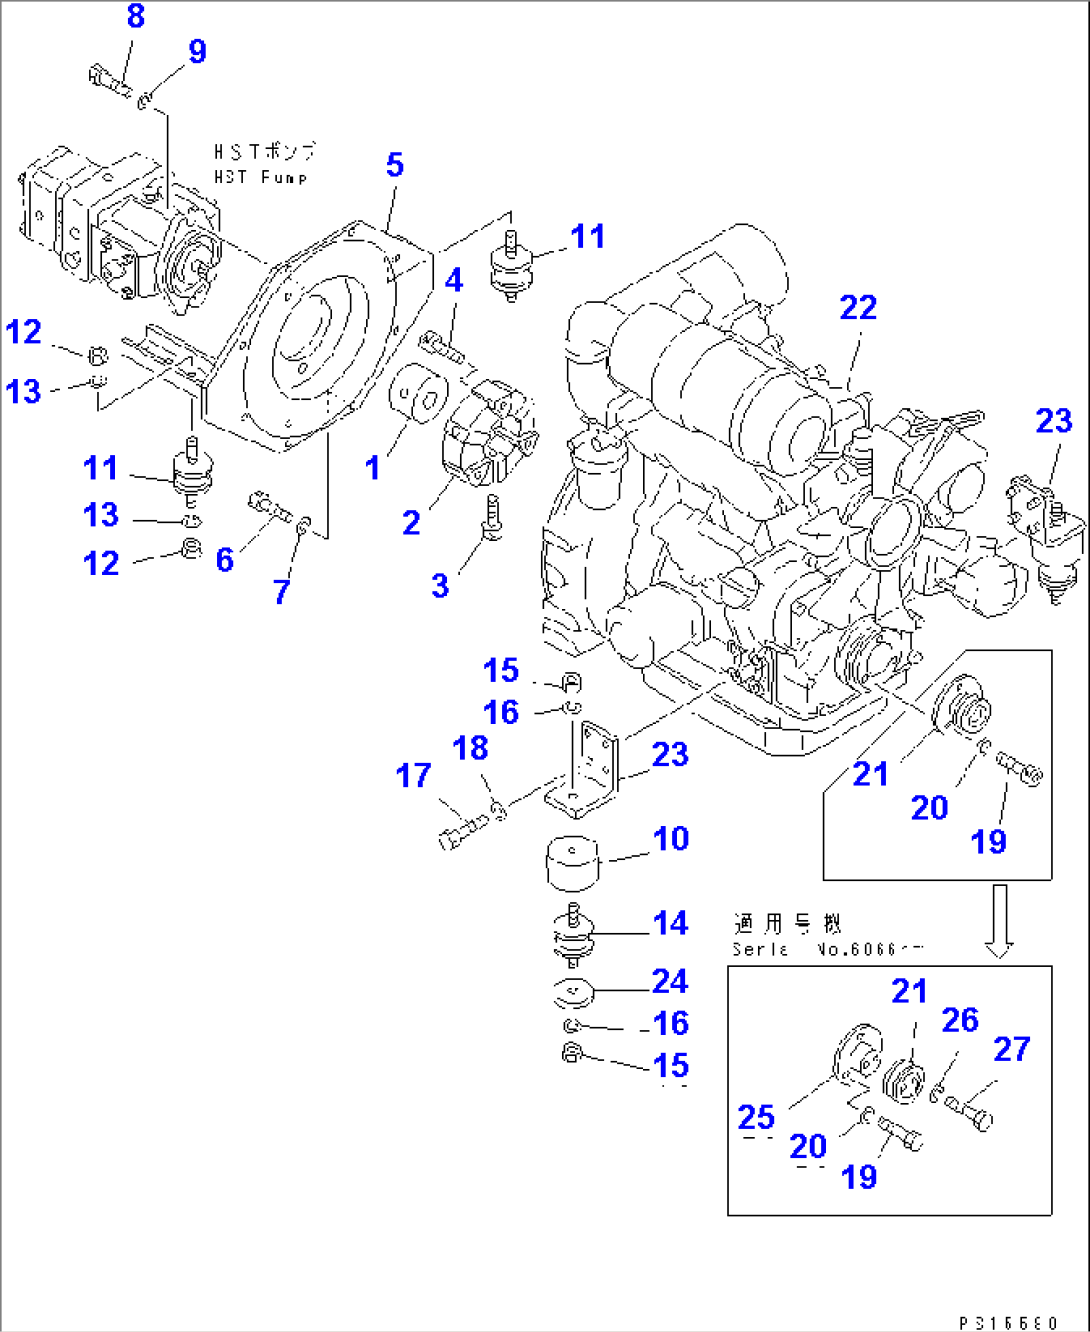 ENGINE MOUNTING PARTS AND MAIN PUMP